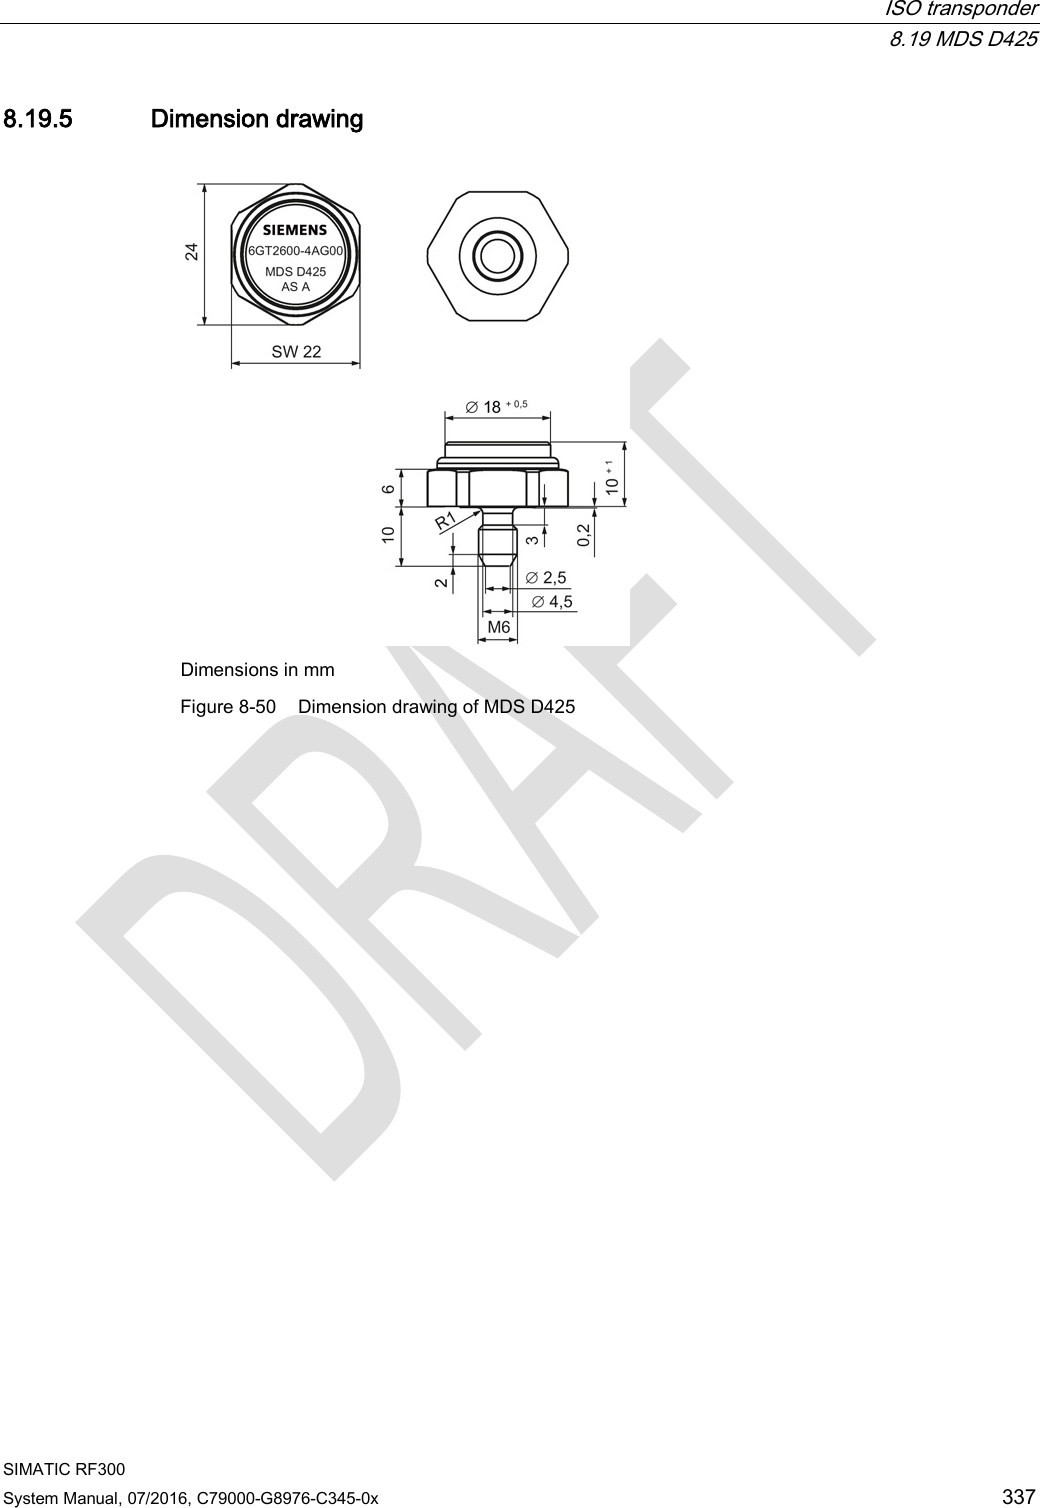  ISO transponder  8.19 MDS D425 SIMATIC RF300 System Manual, 07/2016, C79000-G8976-C345-0x 337 8.19.5 Dimension drawing  Dimensions in mm Figure 8-50 Dimension drawing of MDS D425 